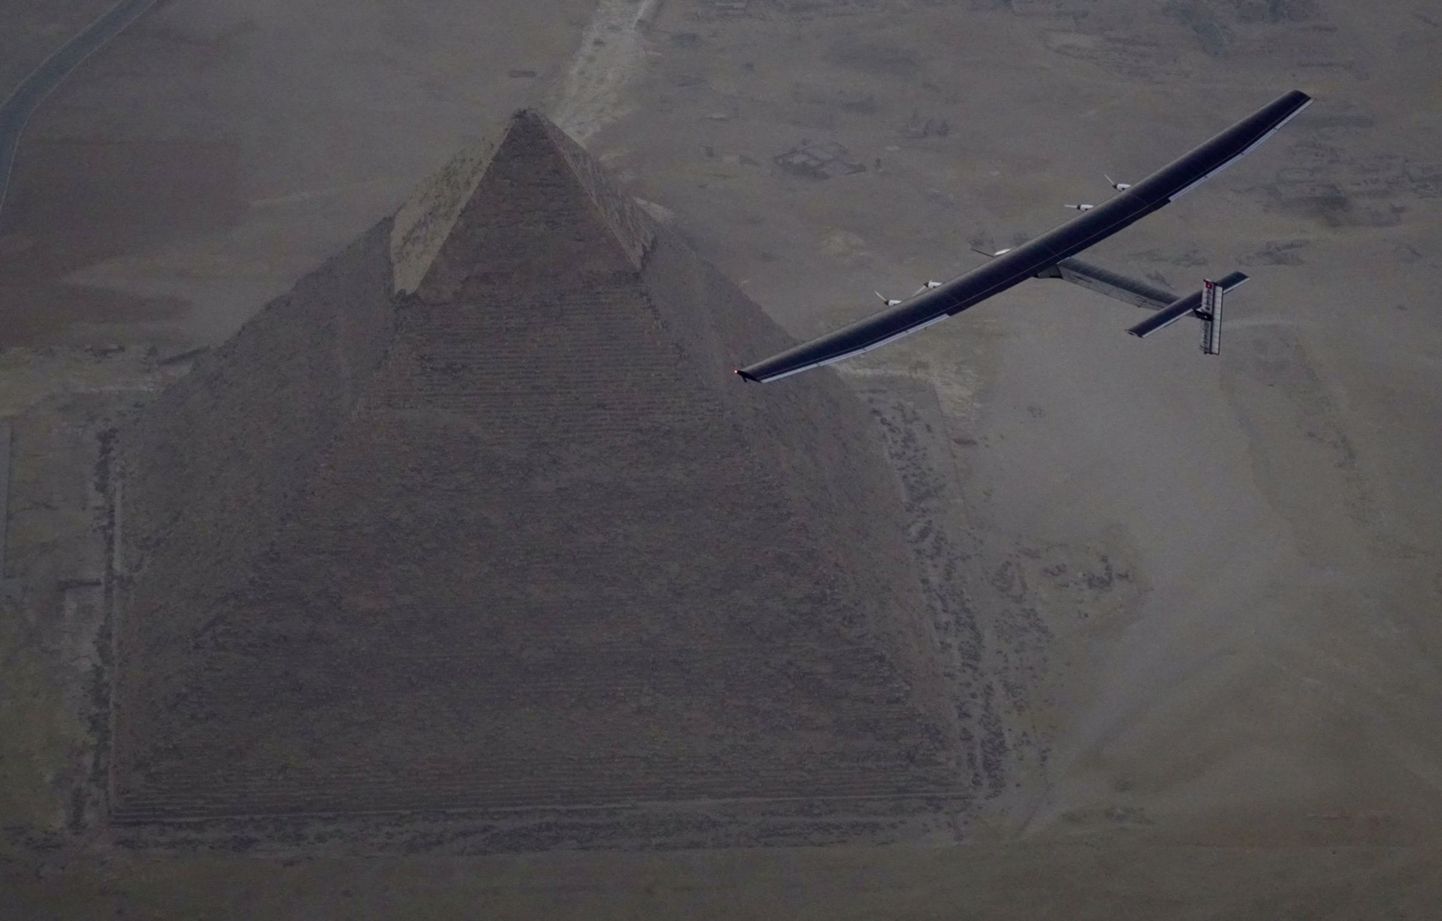 Solar Impulse 2, the solar powered plane, piloted by Swiss pioneer Andre Borschberg is seen during the flyover of the pyramids of Giza on July 13, 2016 prior to the landing in Cairo, Egypt in this photo released on July 13, 2016. Jean Revillard/SI2/Handout via Reuters ATTENTION EDITORS - THIS IMAGE WAS PROVIDED BY A THIRD PARTY. FOR EDITORIAL USE ONLY. NO RESALES. NO ARCHIVES.